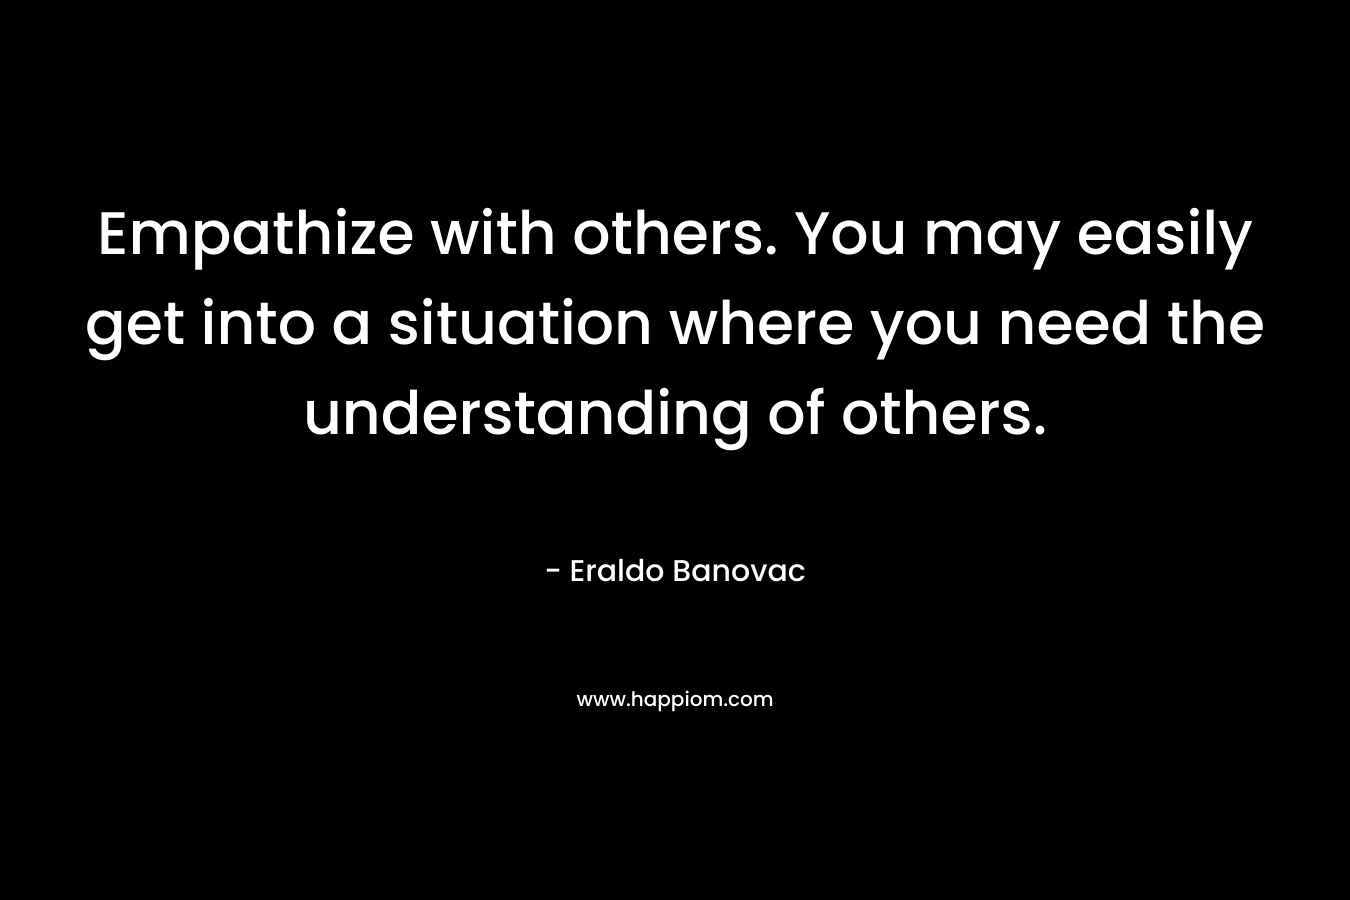 Empathize with others. You may easily get into a situation where you need the understanding of others. – Eraldo Banovac